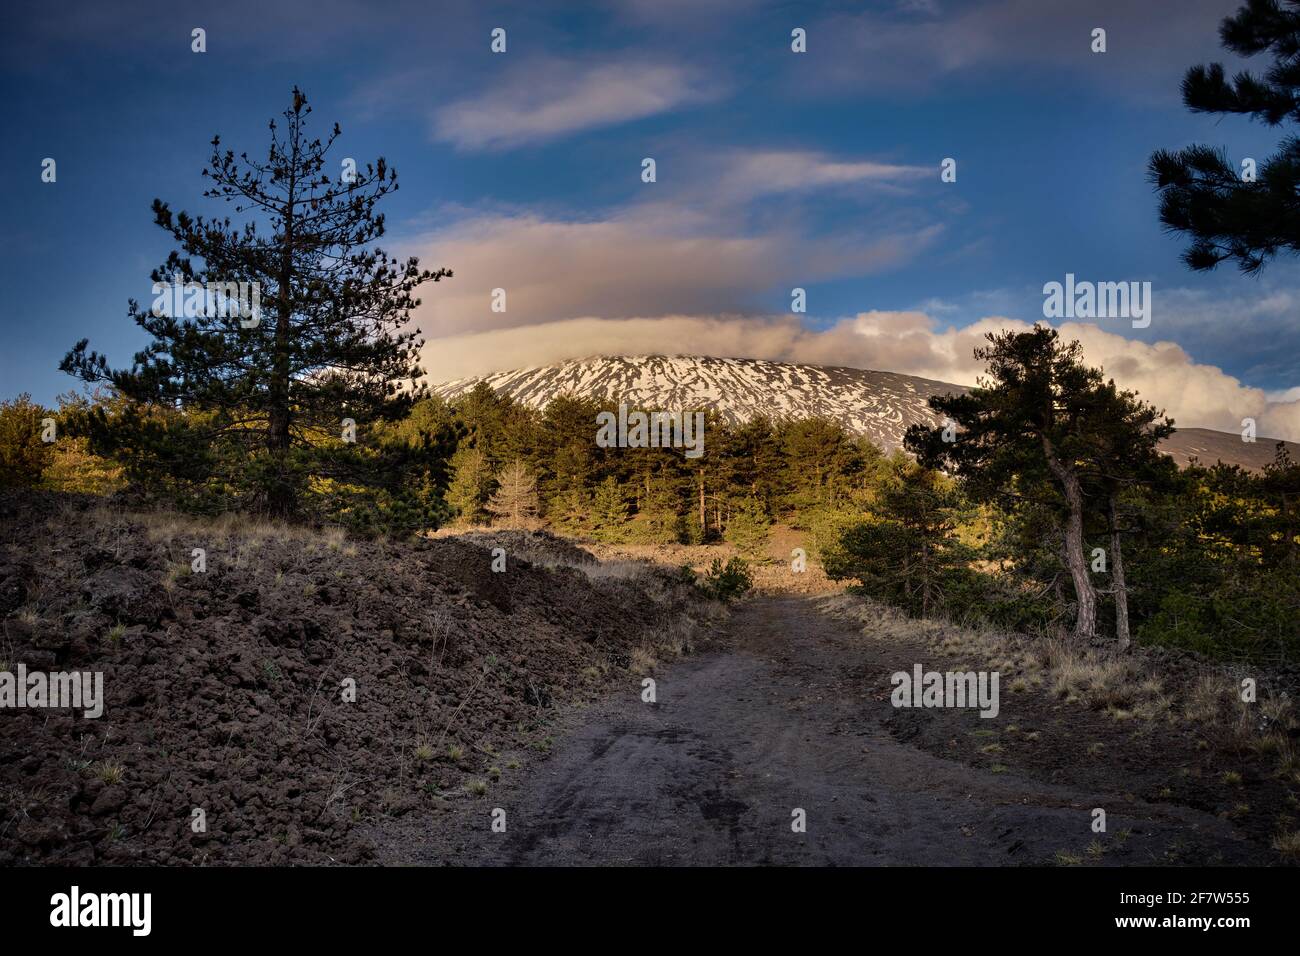 landmark of nature in Sicily it's mountain landscape of Etna Park dirt road crosses old lava and pine forest on background slopes of the volcano snow Stock Photo